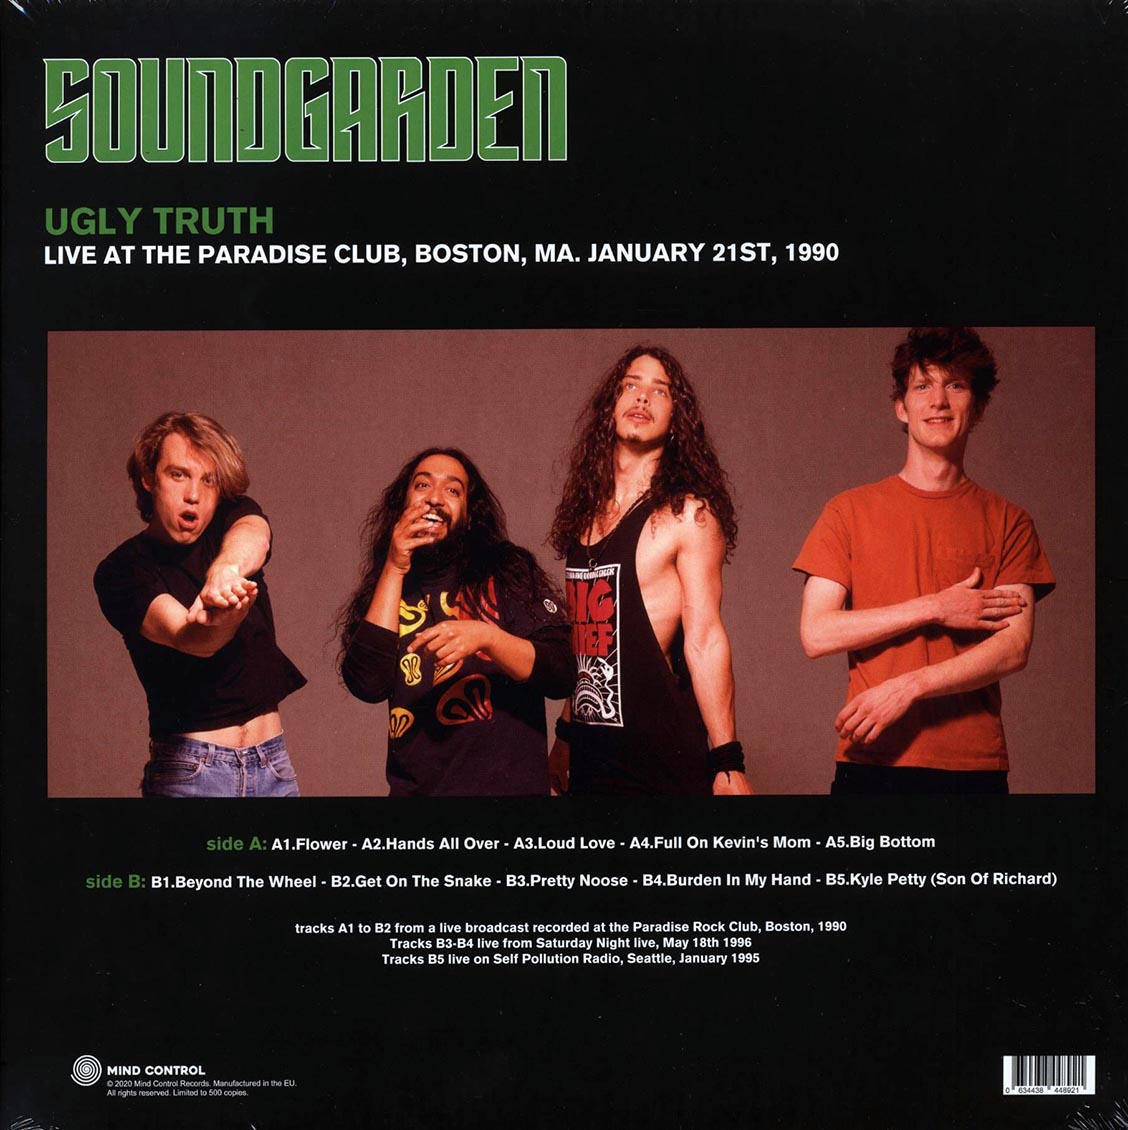 Soundgarden - Ugly Truth: Live At The Paradise Club, Boston, MA January 21st, 1990 (ltd. 500 copies made) - Vinyl LP, LP